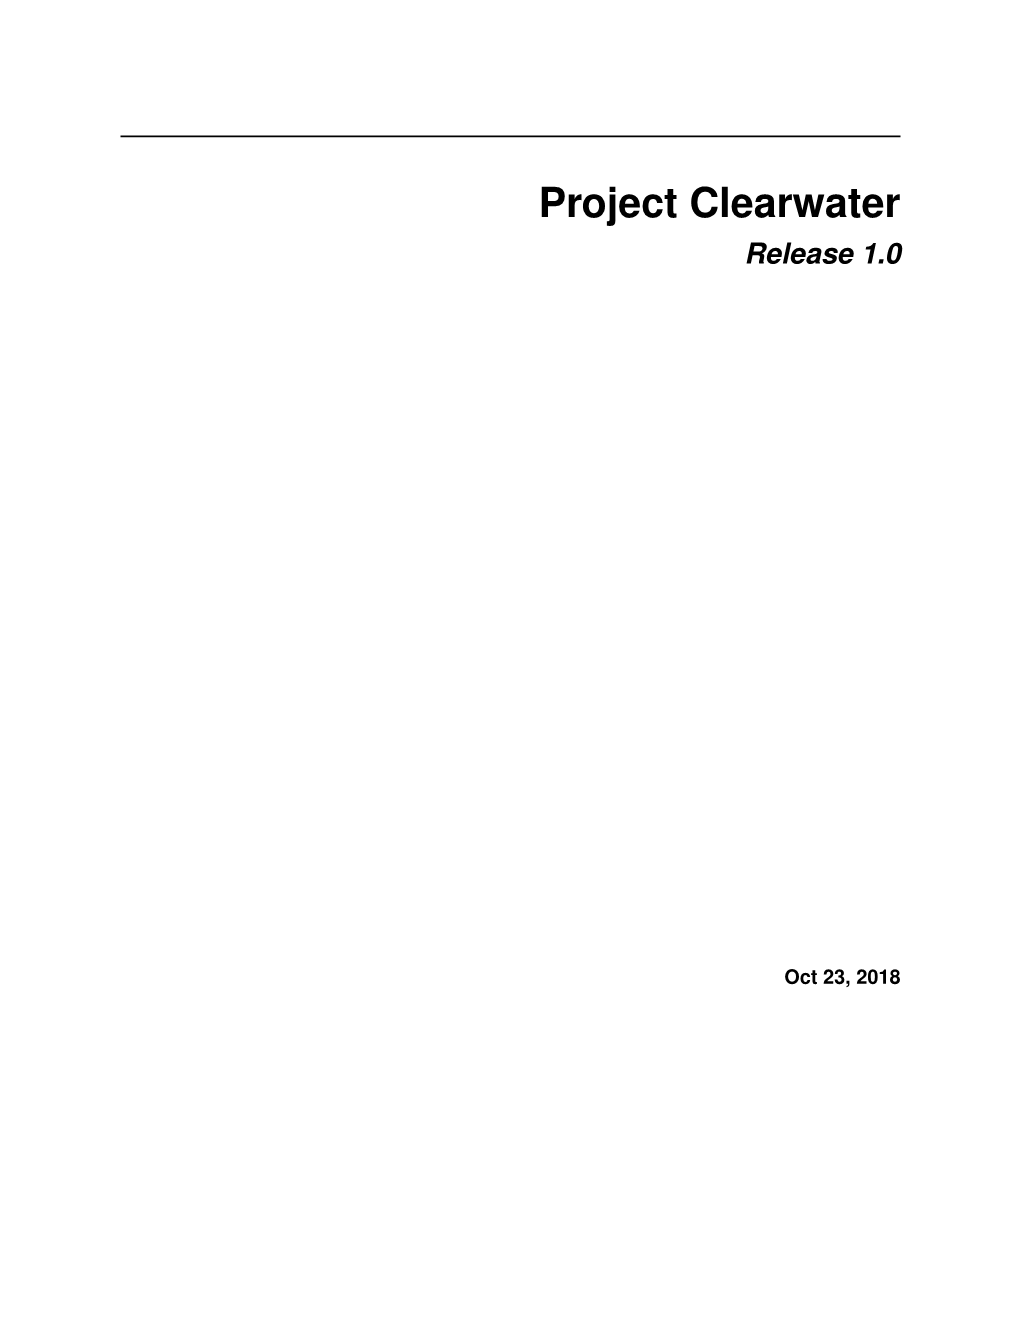 Project Clearwater Release 1.0